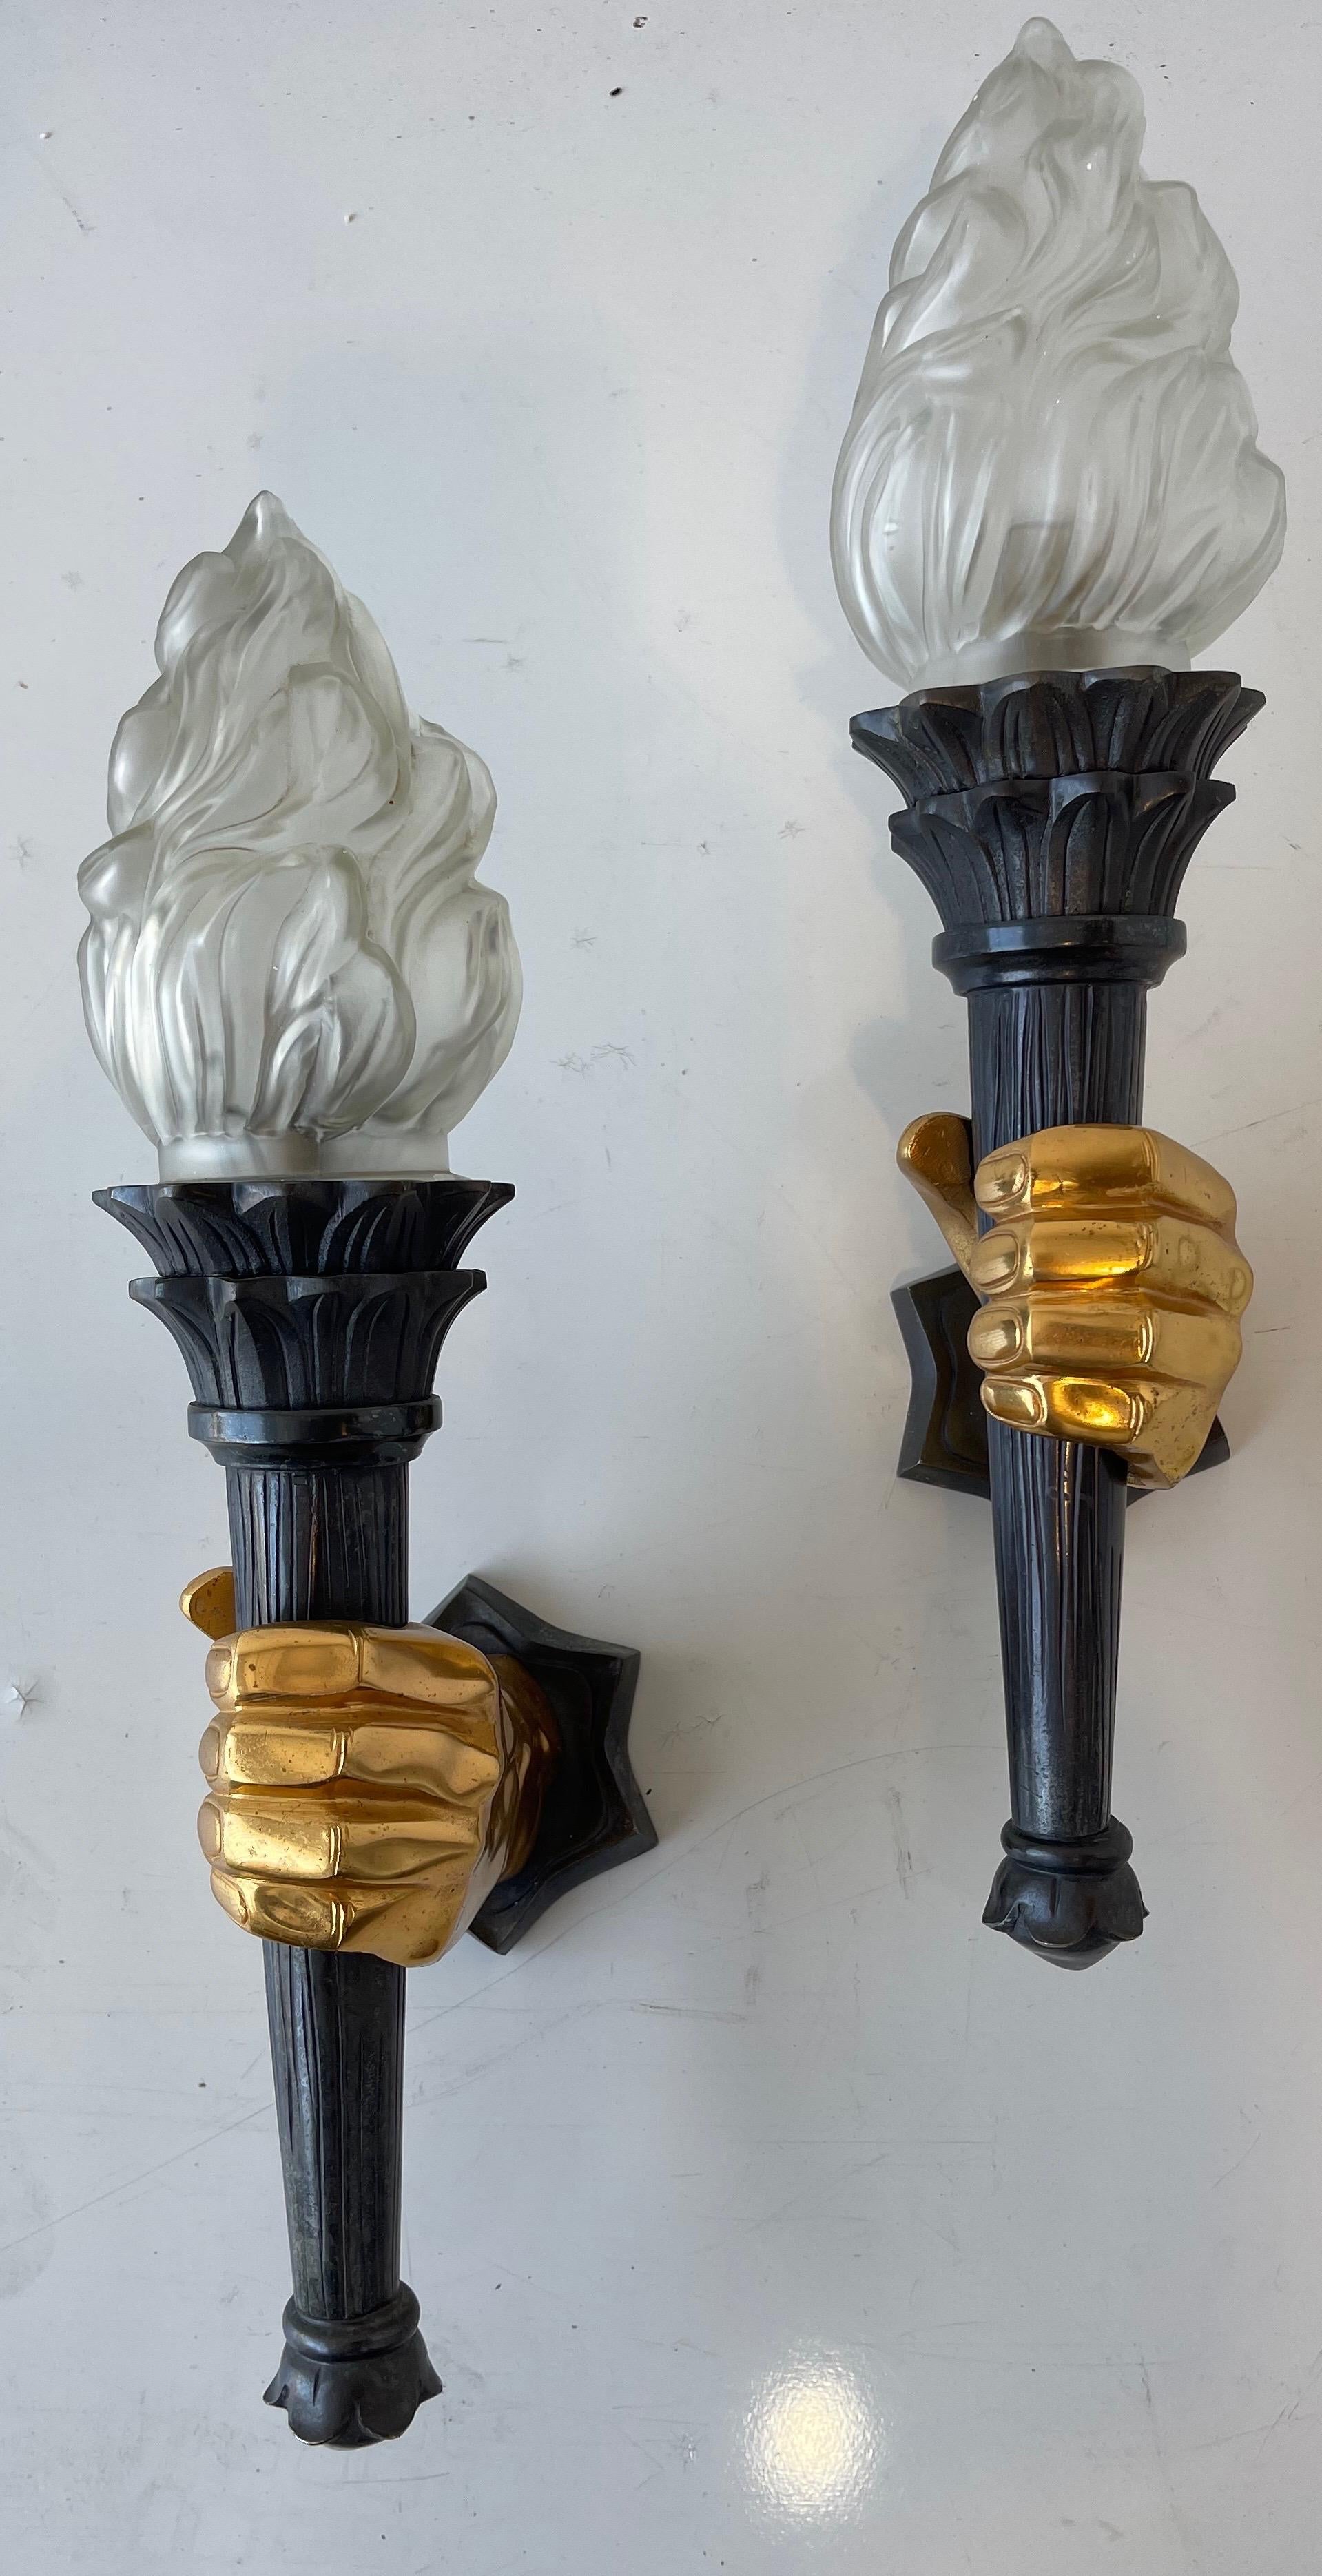 Exceptional suite of 6 French bronze 2 patina wall Sconces in the style of Maison Jansen, circa 1960.
Priced by pair.
US rewired, one socket, 60 watts max or LED .
Backplate dimensions: 4 3/8 H 4 W.